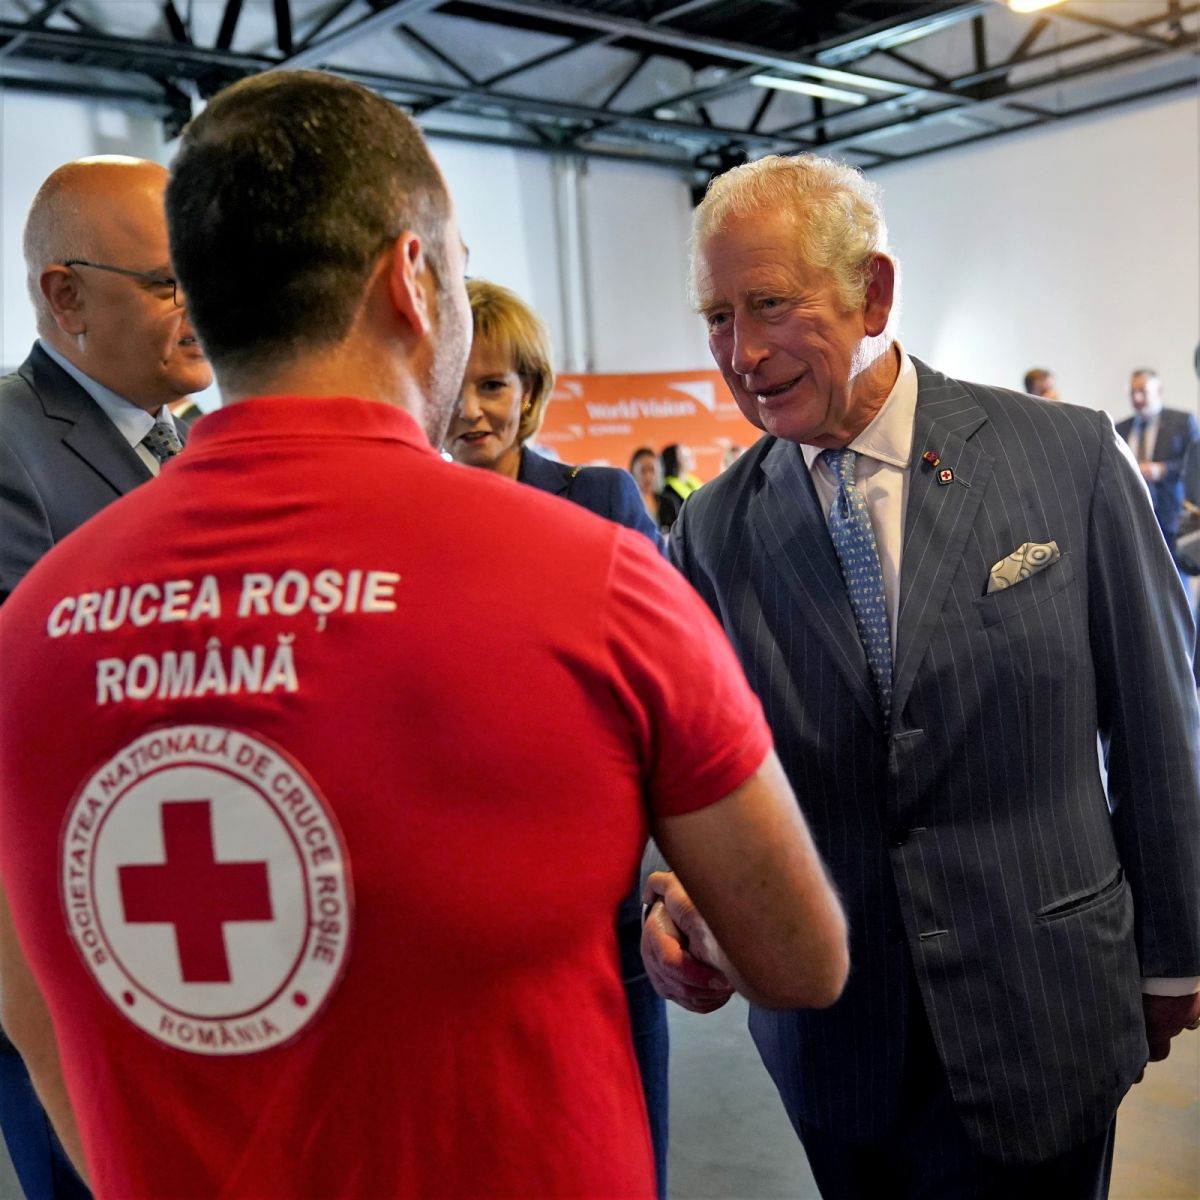 Visiting Ukrainian refugees in Romania from Prince Charles #5